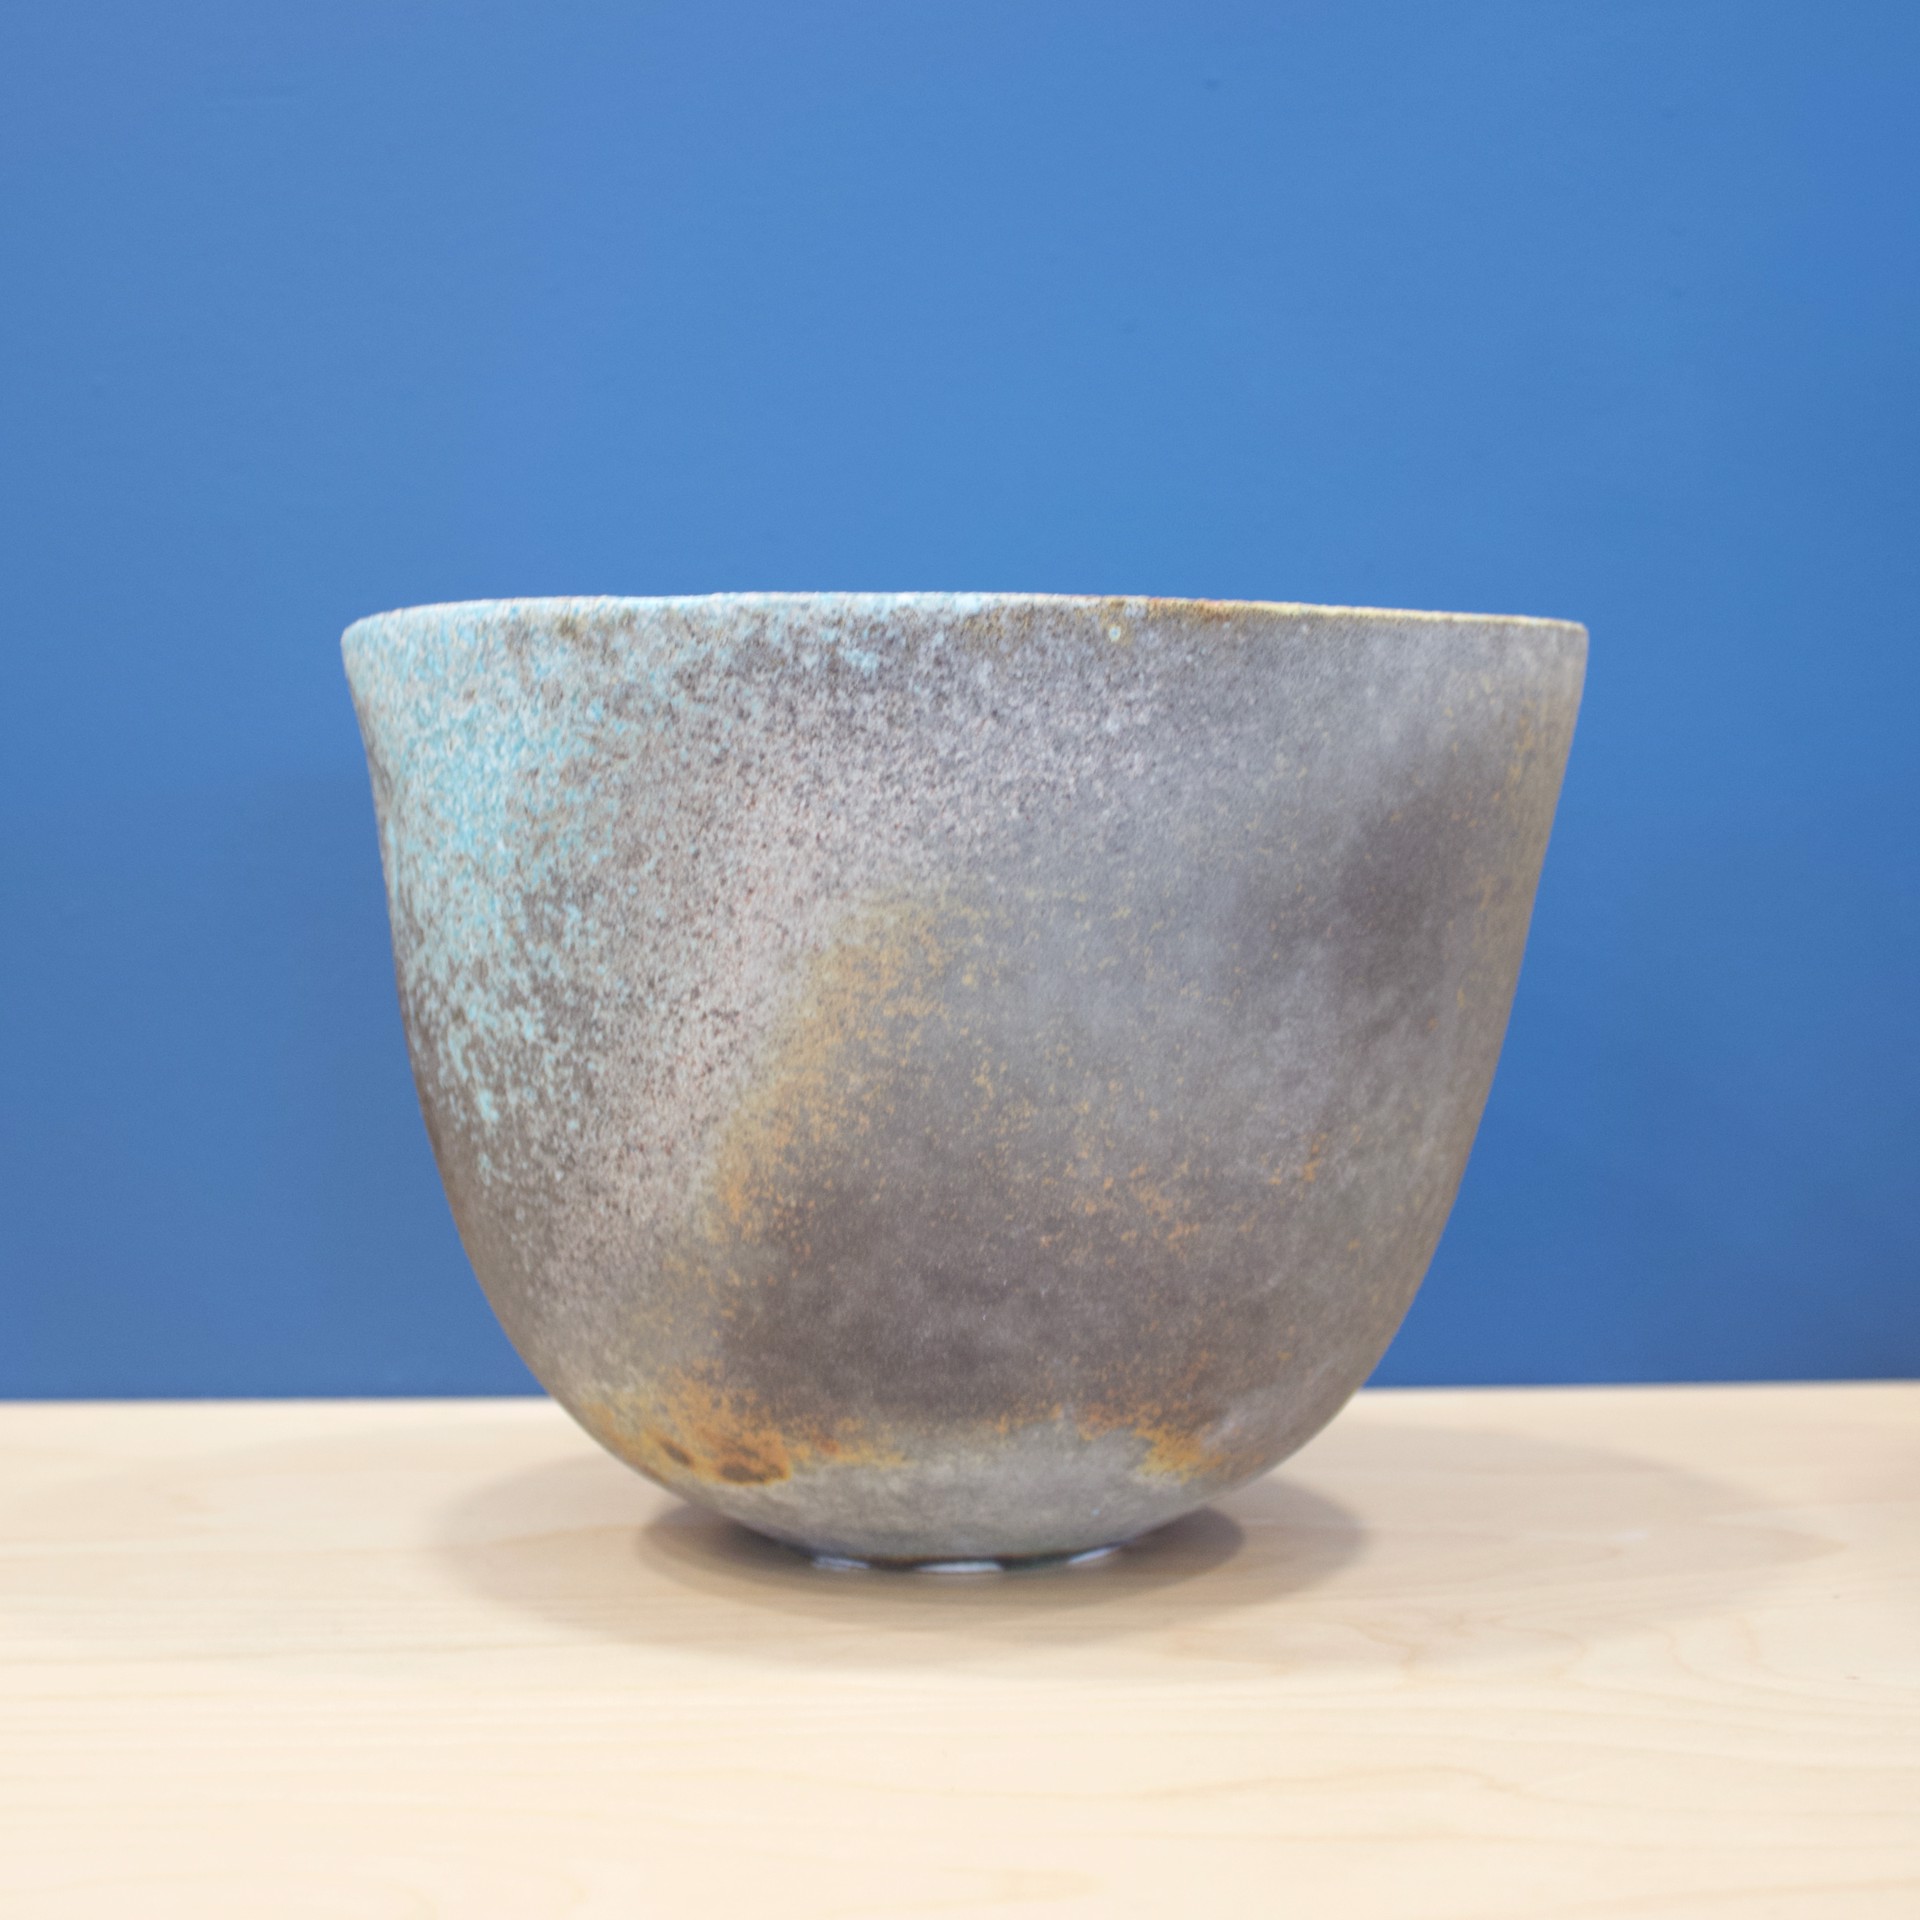 Smokey Conical Vessel by Jack Doherty